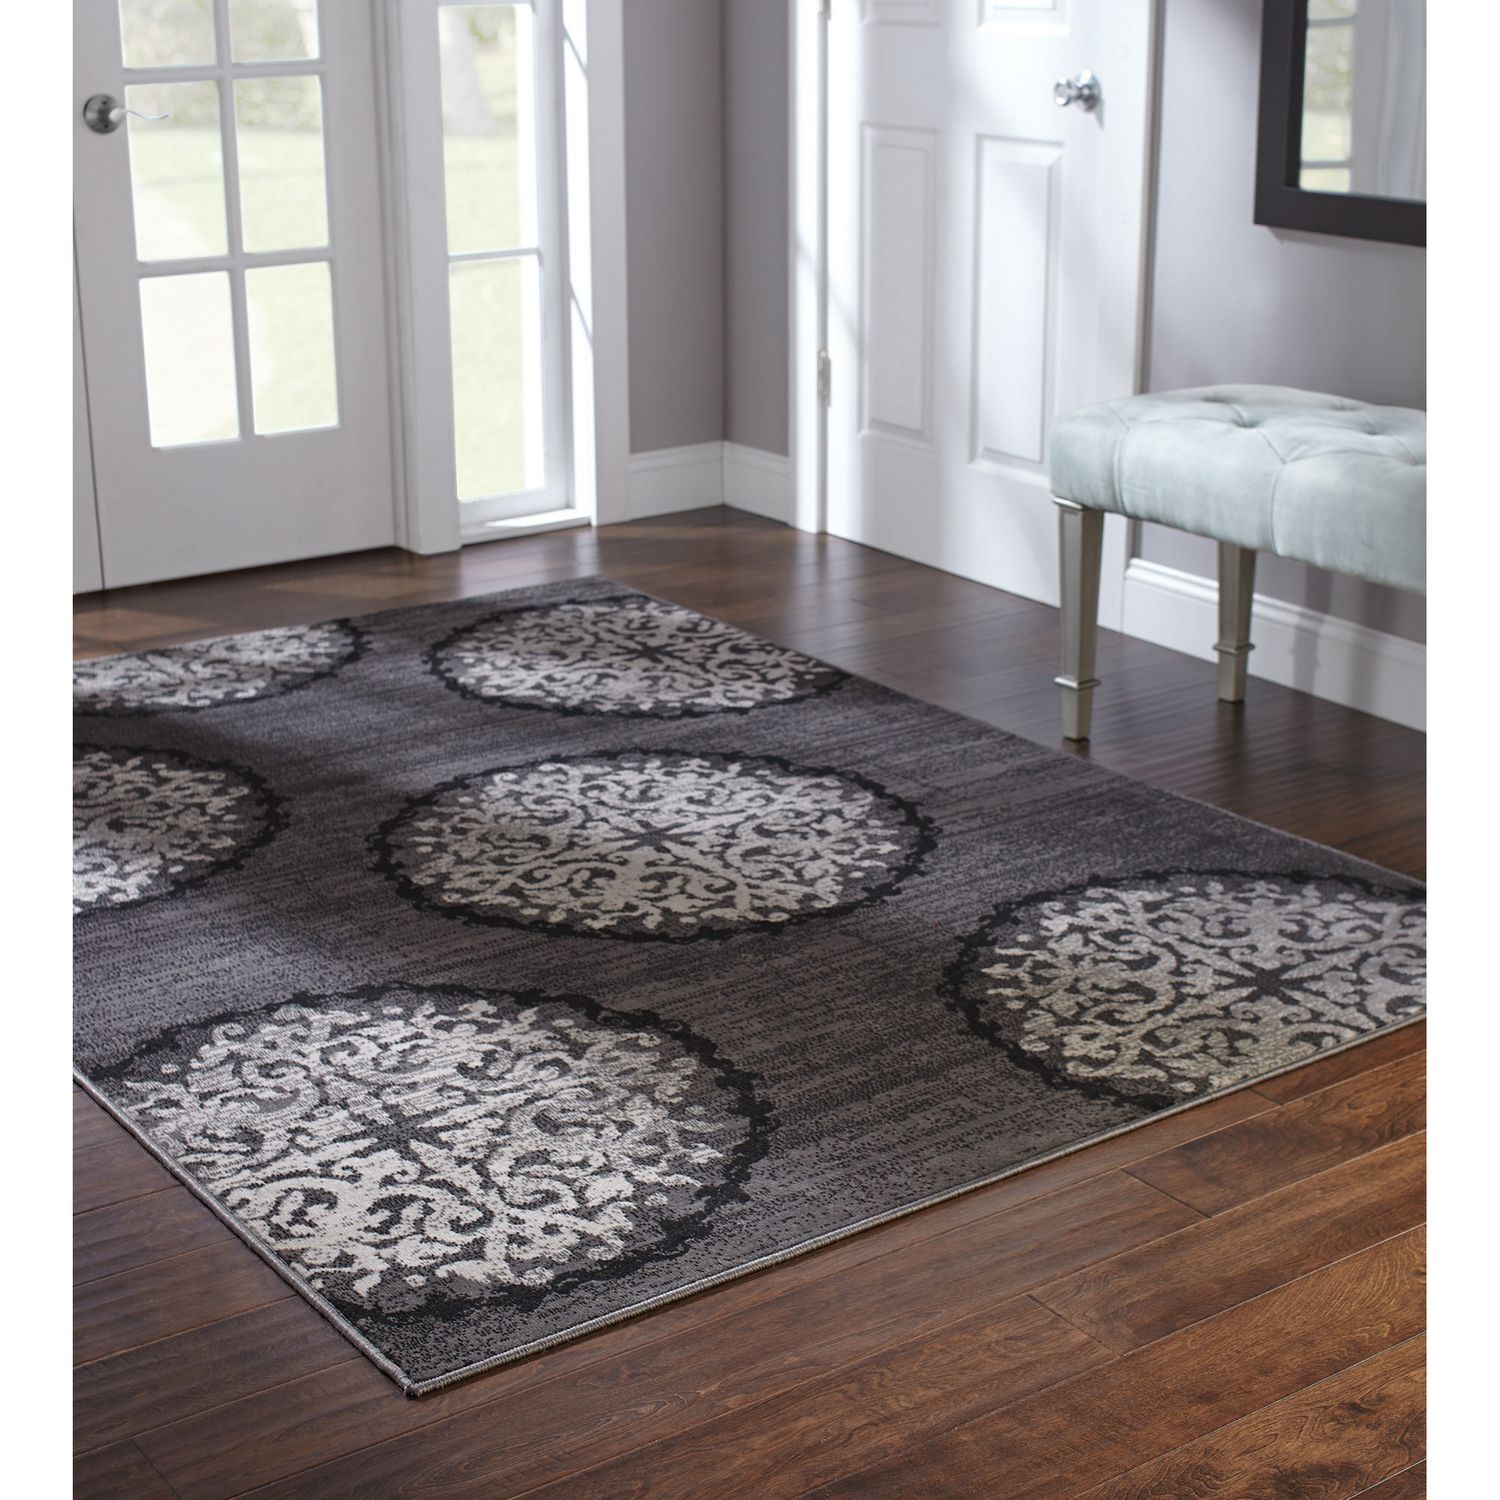 Home Trends Area Rug 5 Ft X 8 Ft Charcoal Medallions Walmart